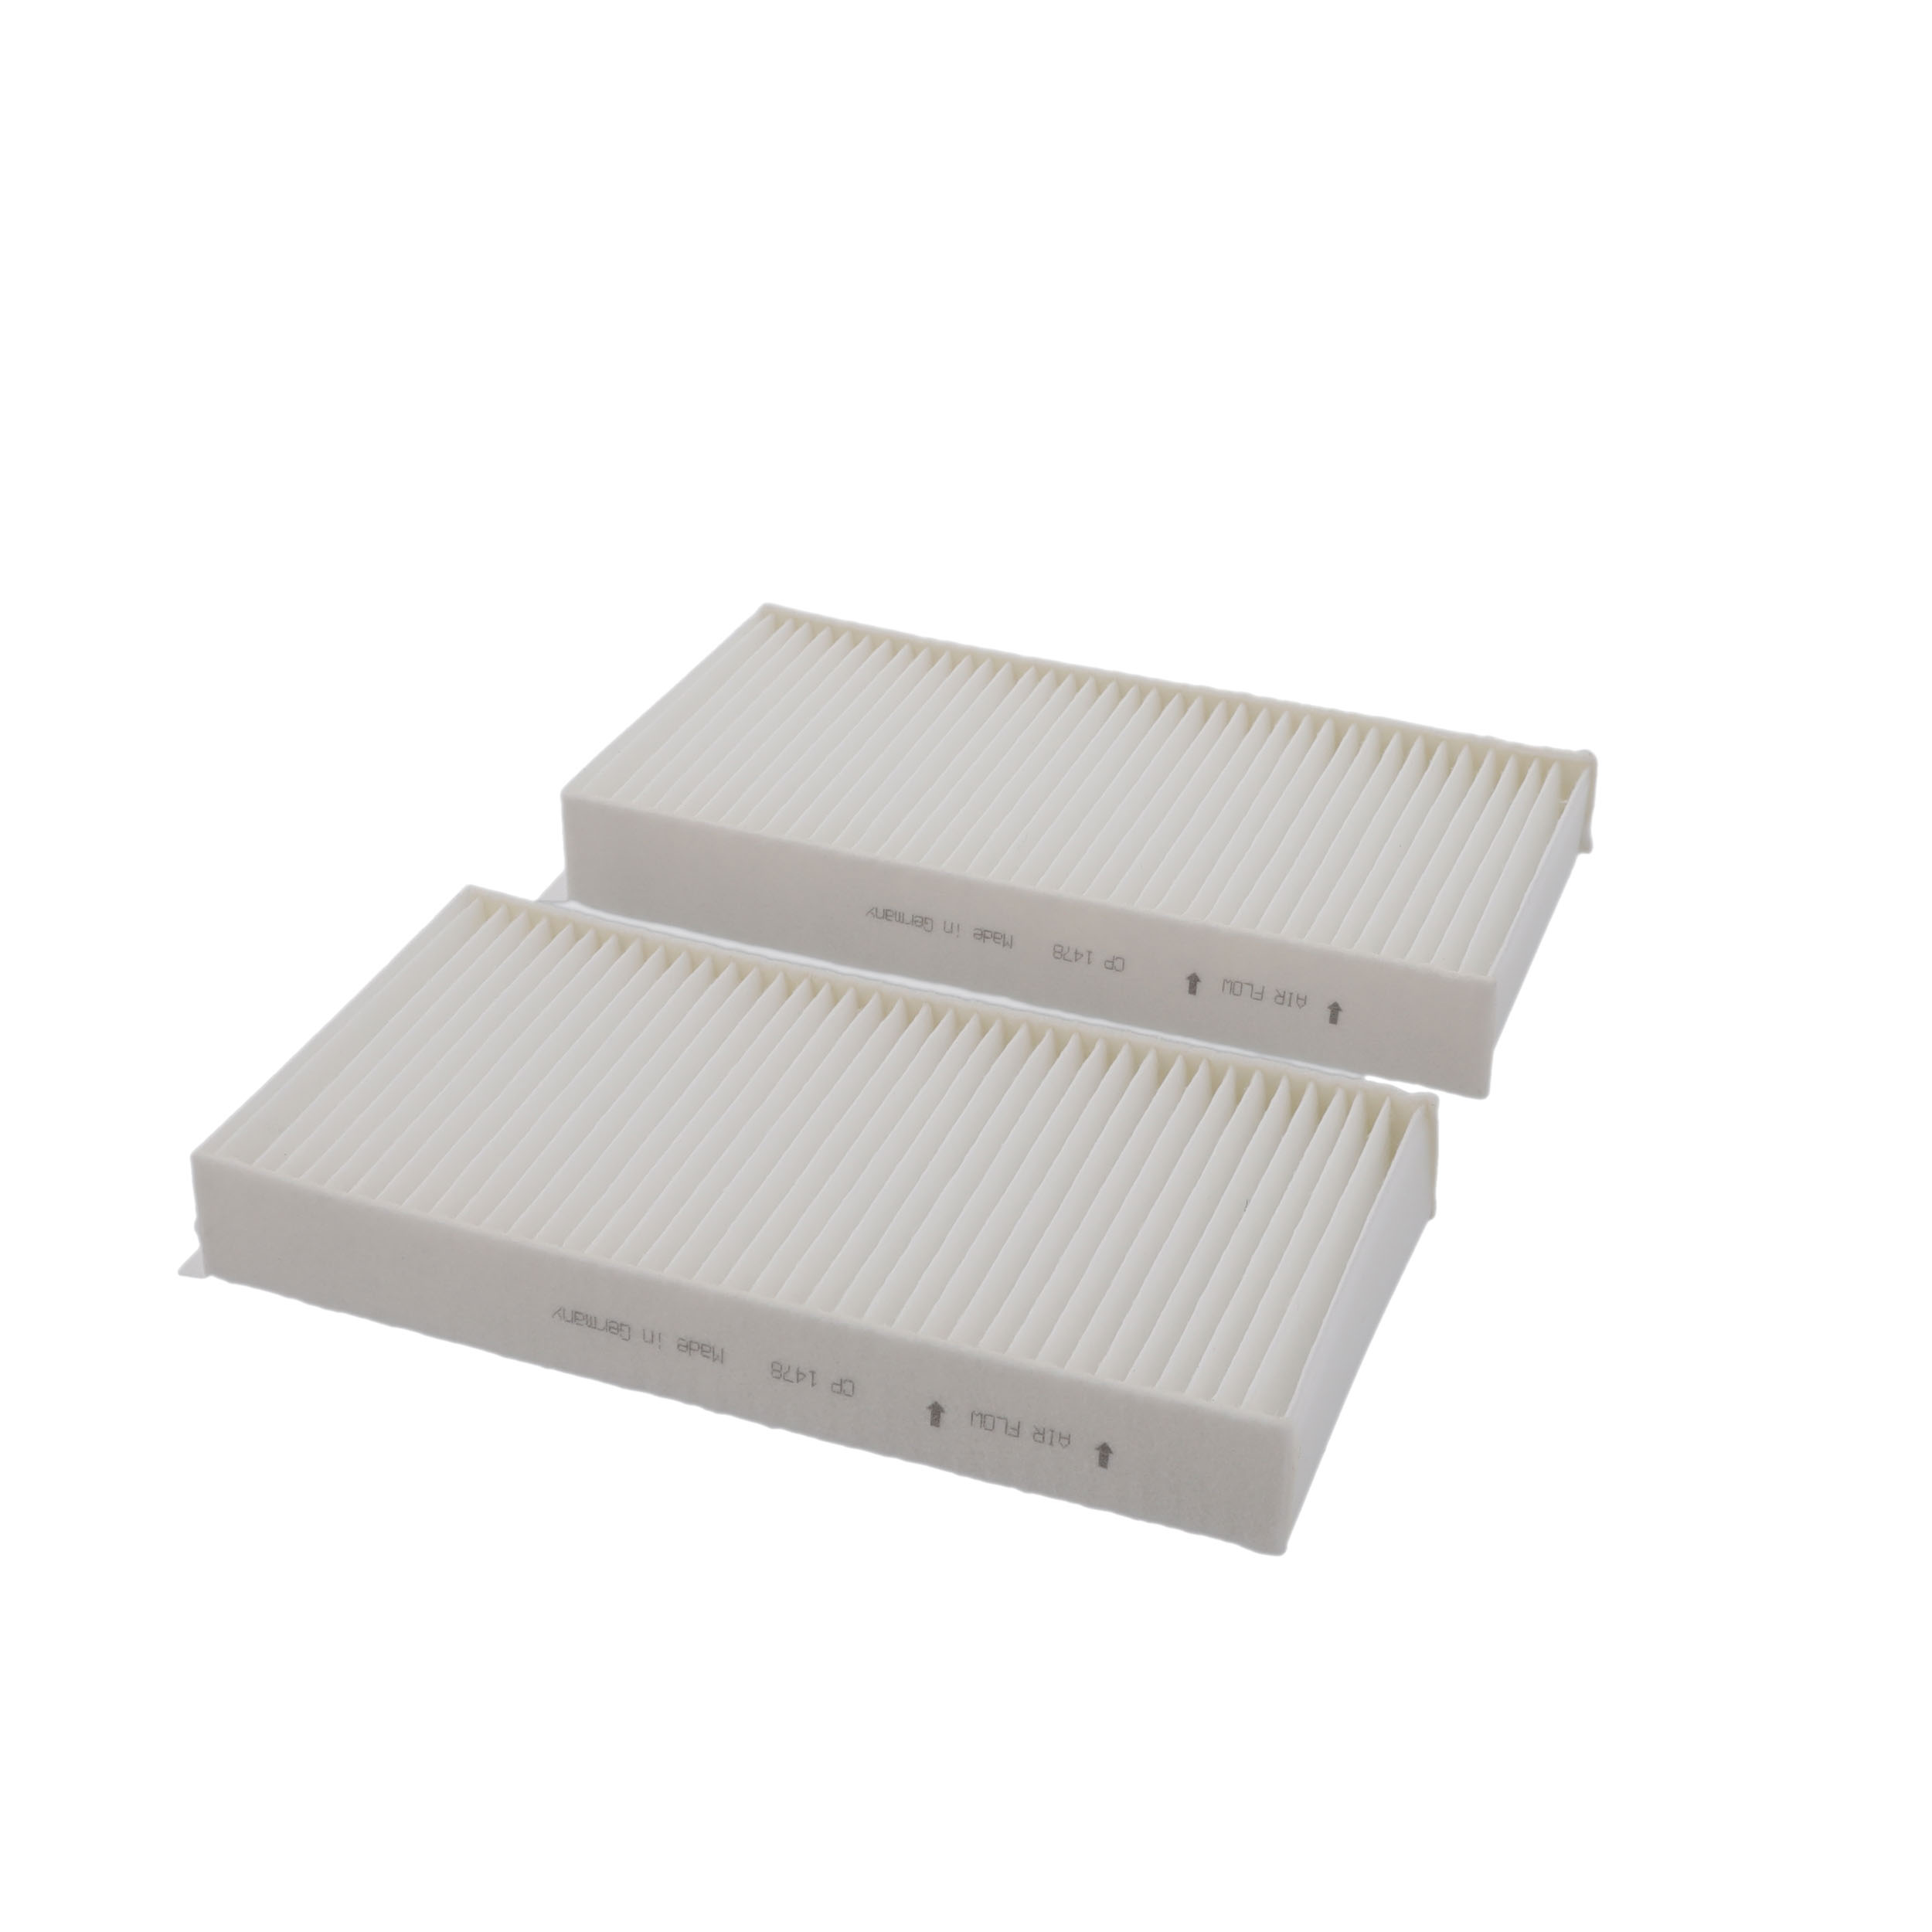 CORTECO Particulate Filter, 233 mm x 116 mm x 31 mm Width: 116mm, Height: 31mm, Length: 233mm Cabin filter 80005089 buy